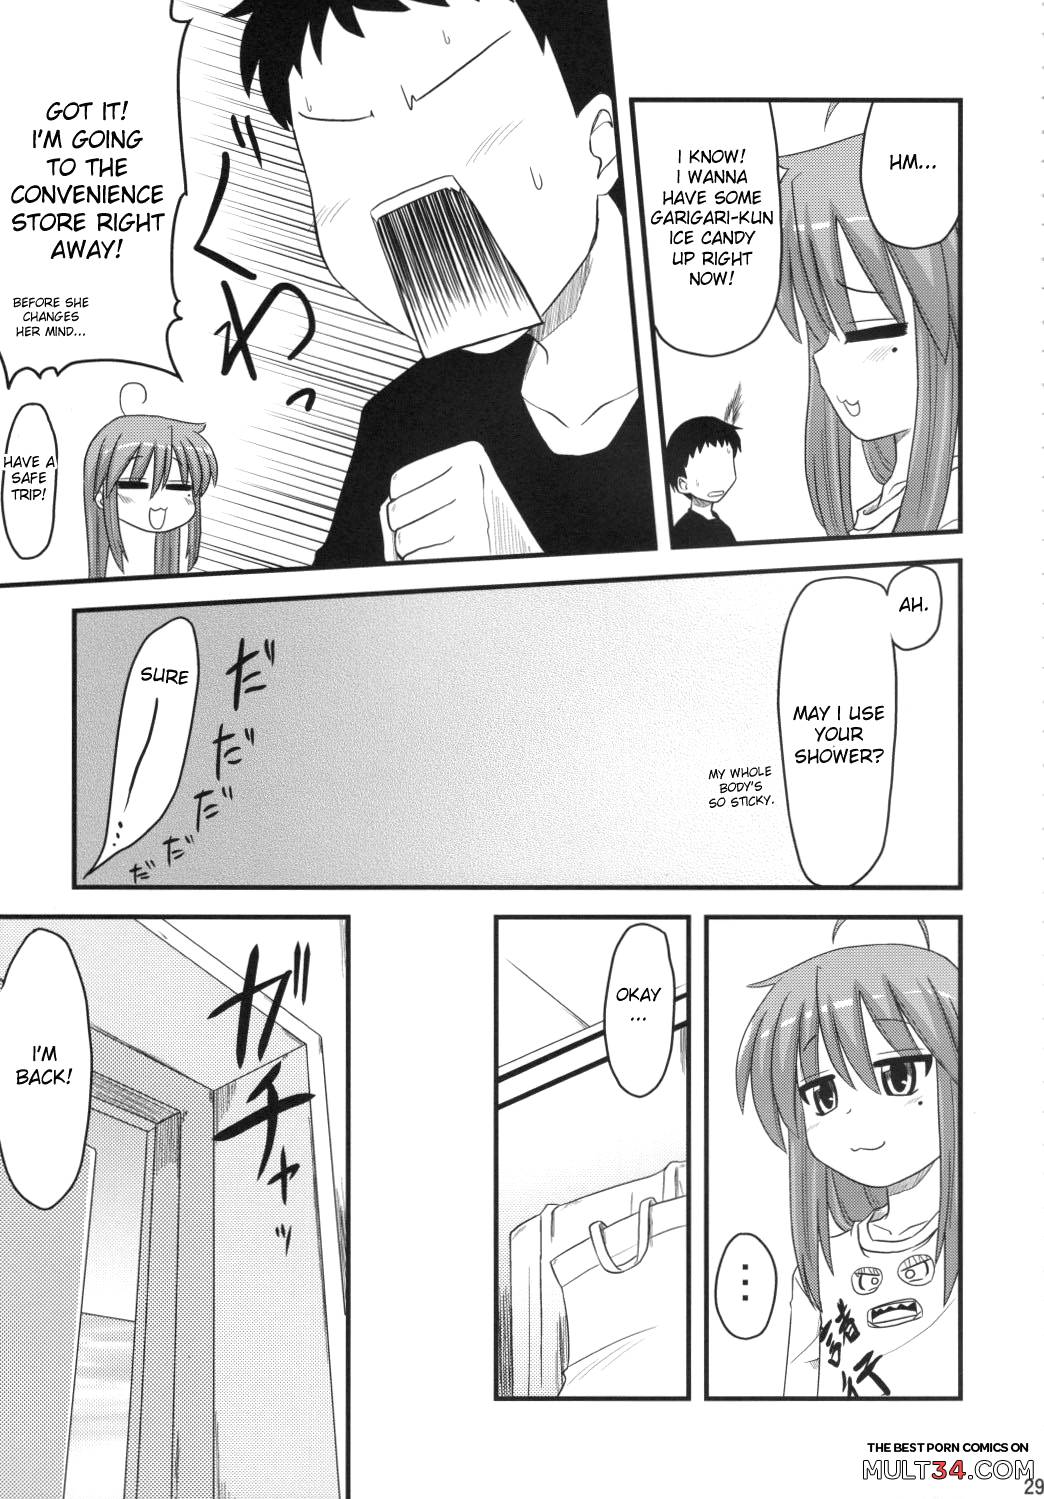 Konata and Oh-zu 4 people each and every one + 1 page 25